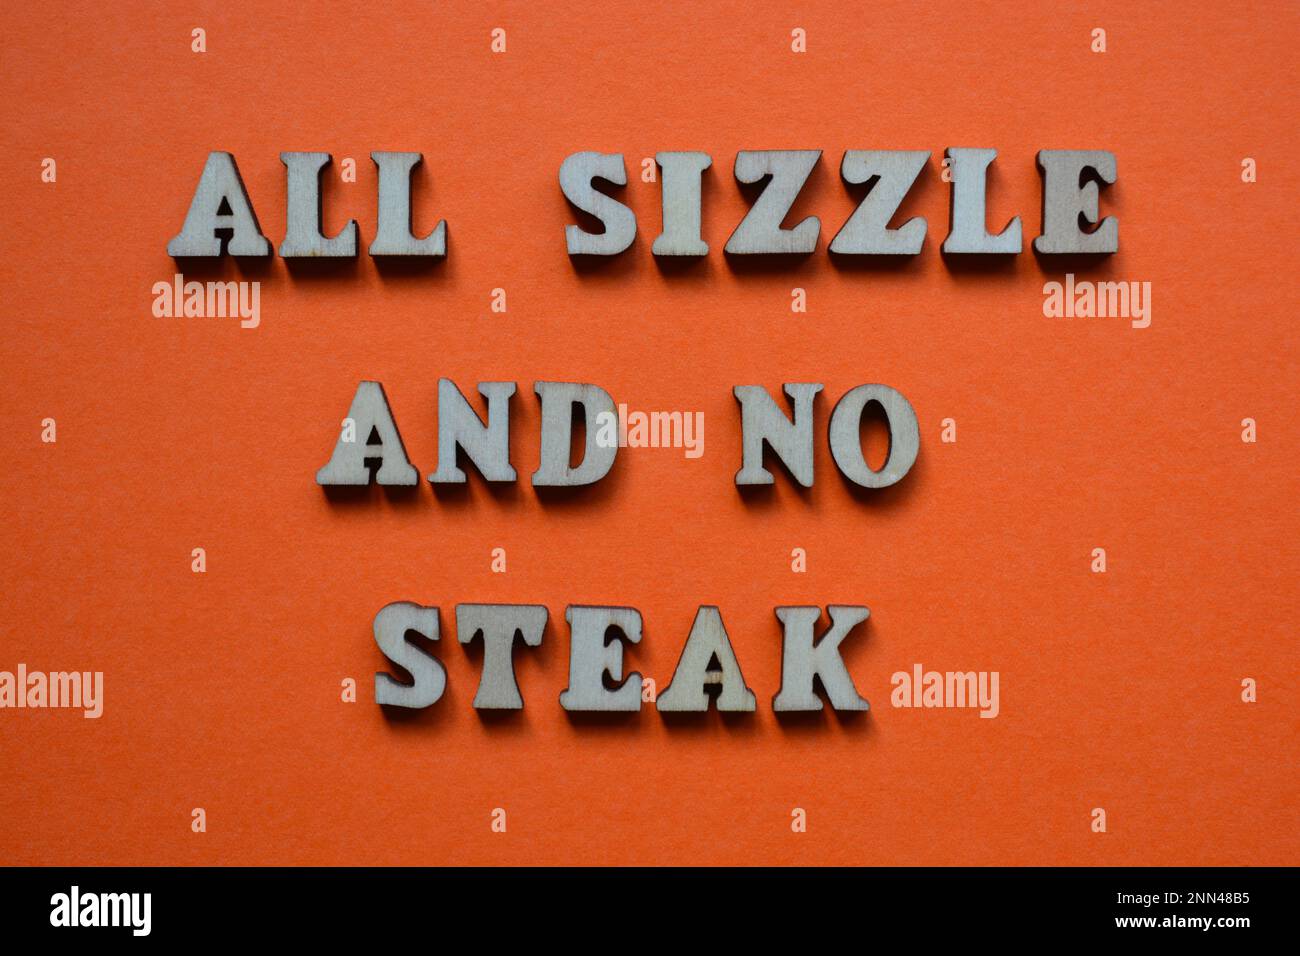 All Sizzle and No Steak, phrase in wooden alphabet letters isolated on orange background Stock Photo